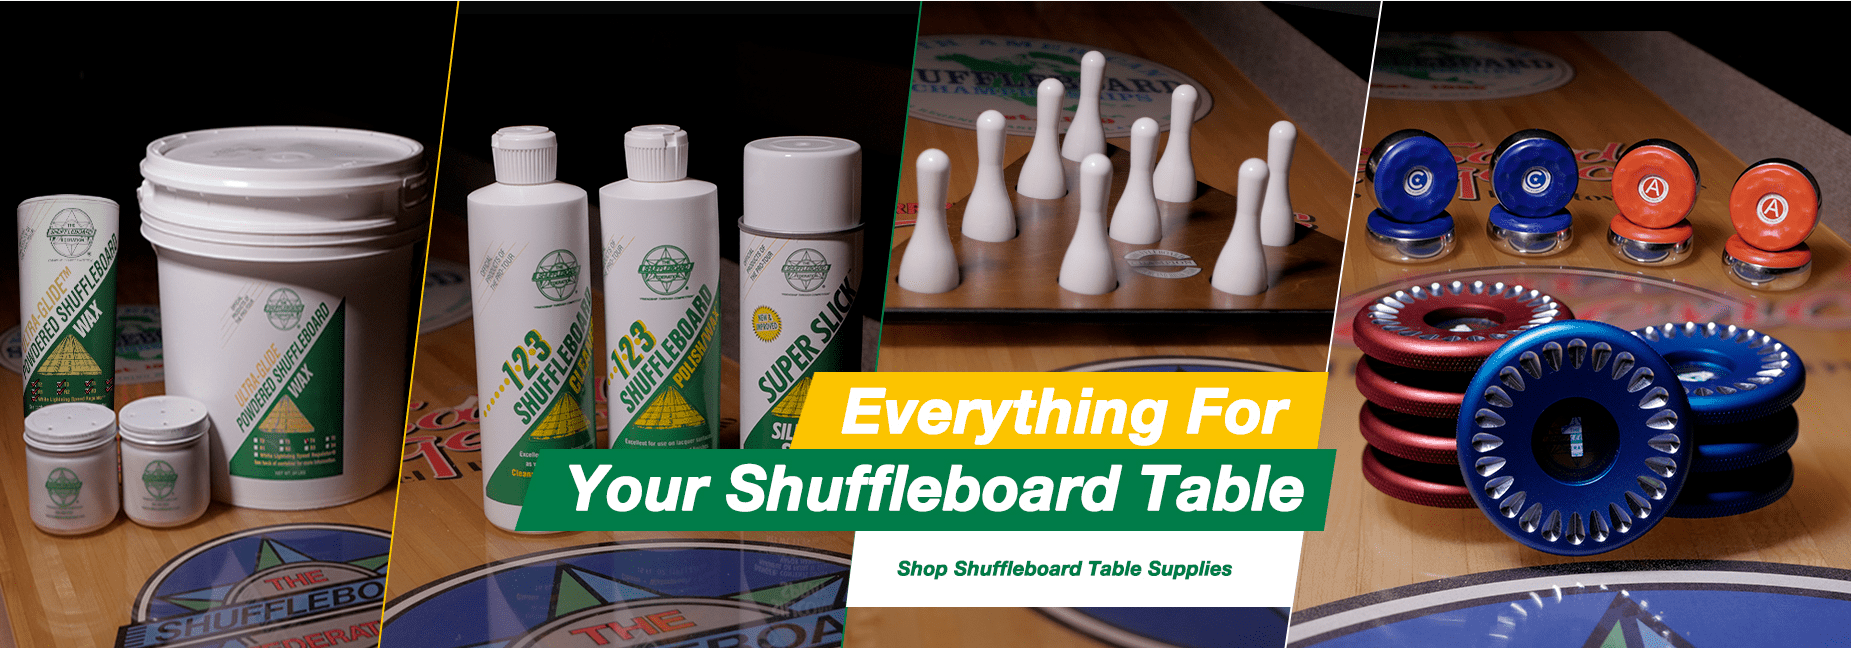 Shuffleboard Tables For Sale, Table Shuffleboard Supplies and Accessories